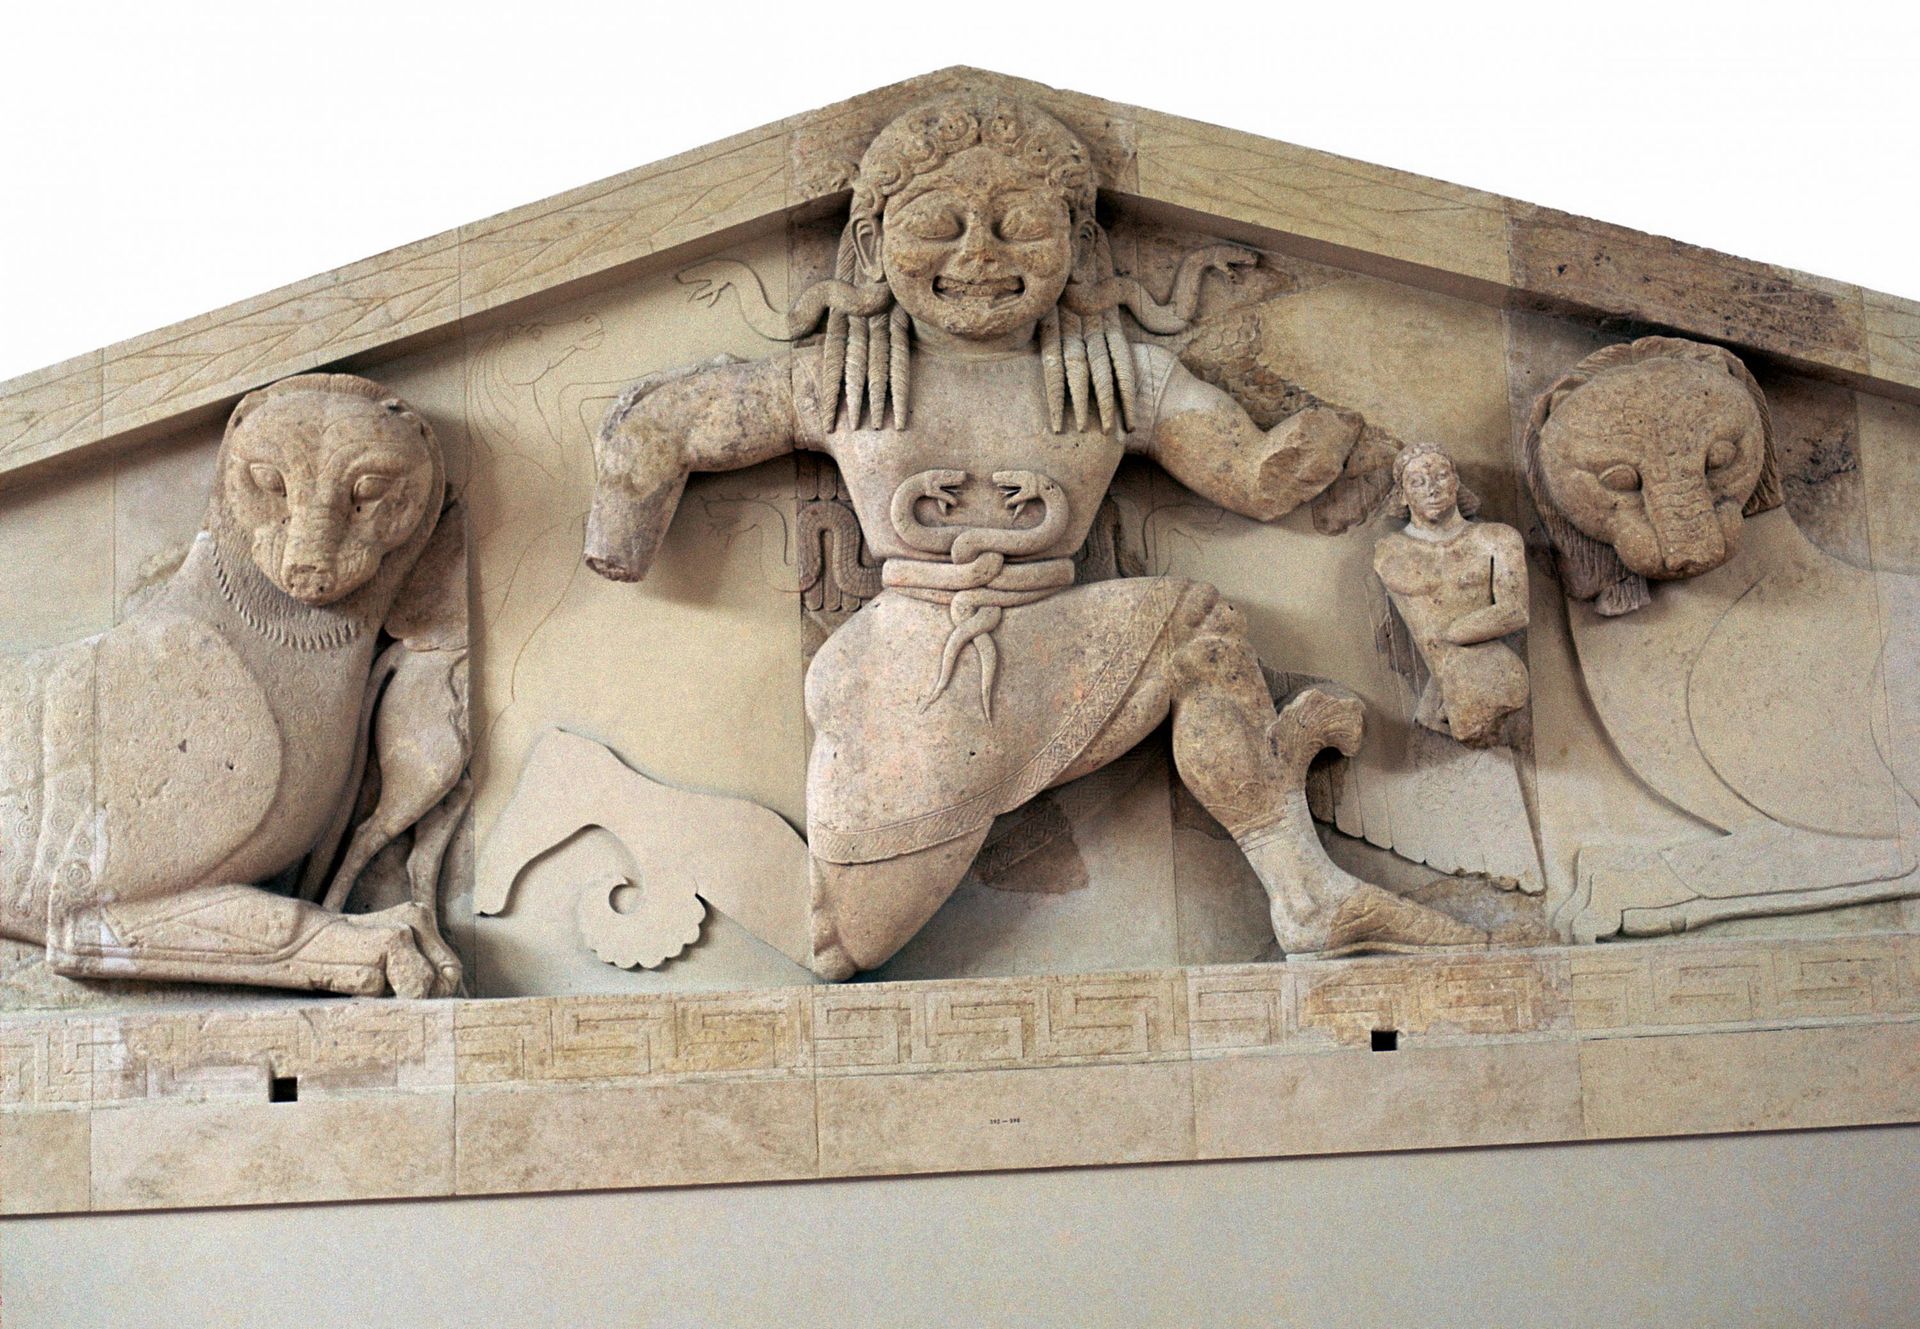 A gorgon and panthers from the pediment of the temple of Artemis on Corfu.